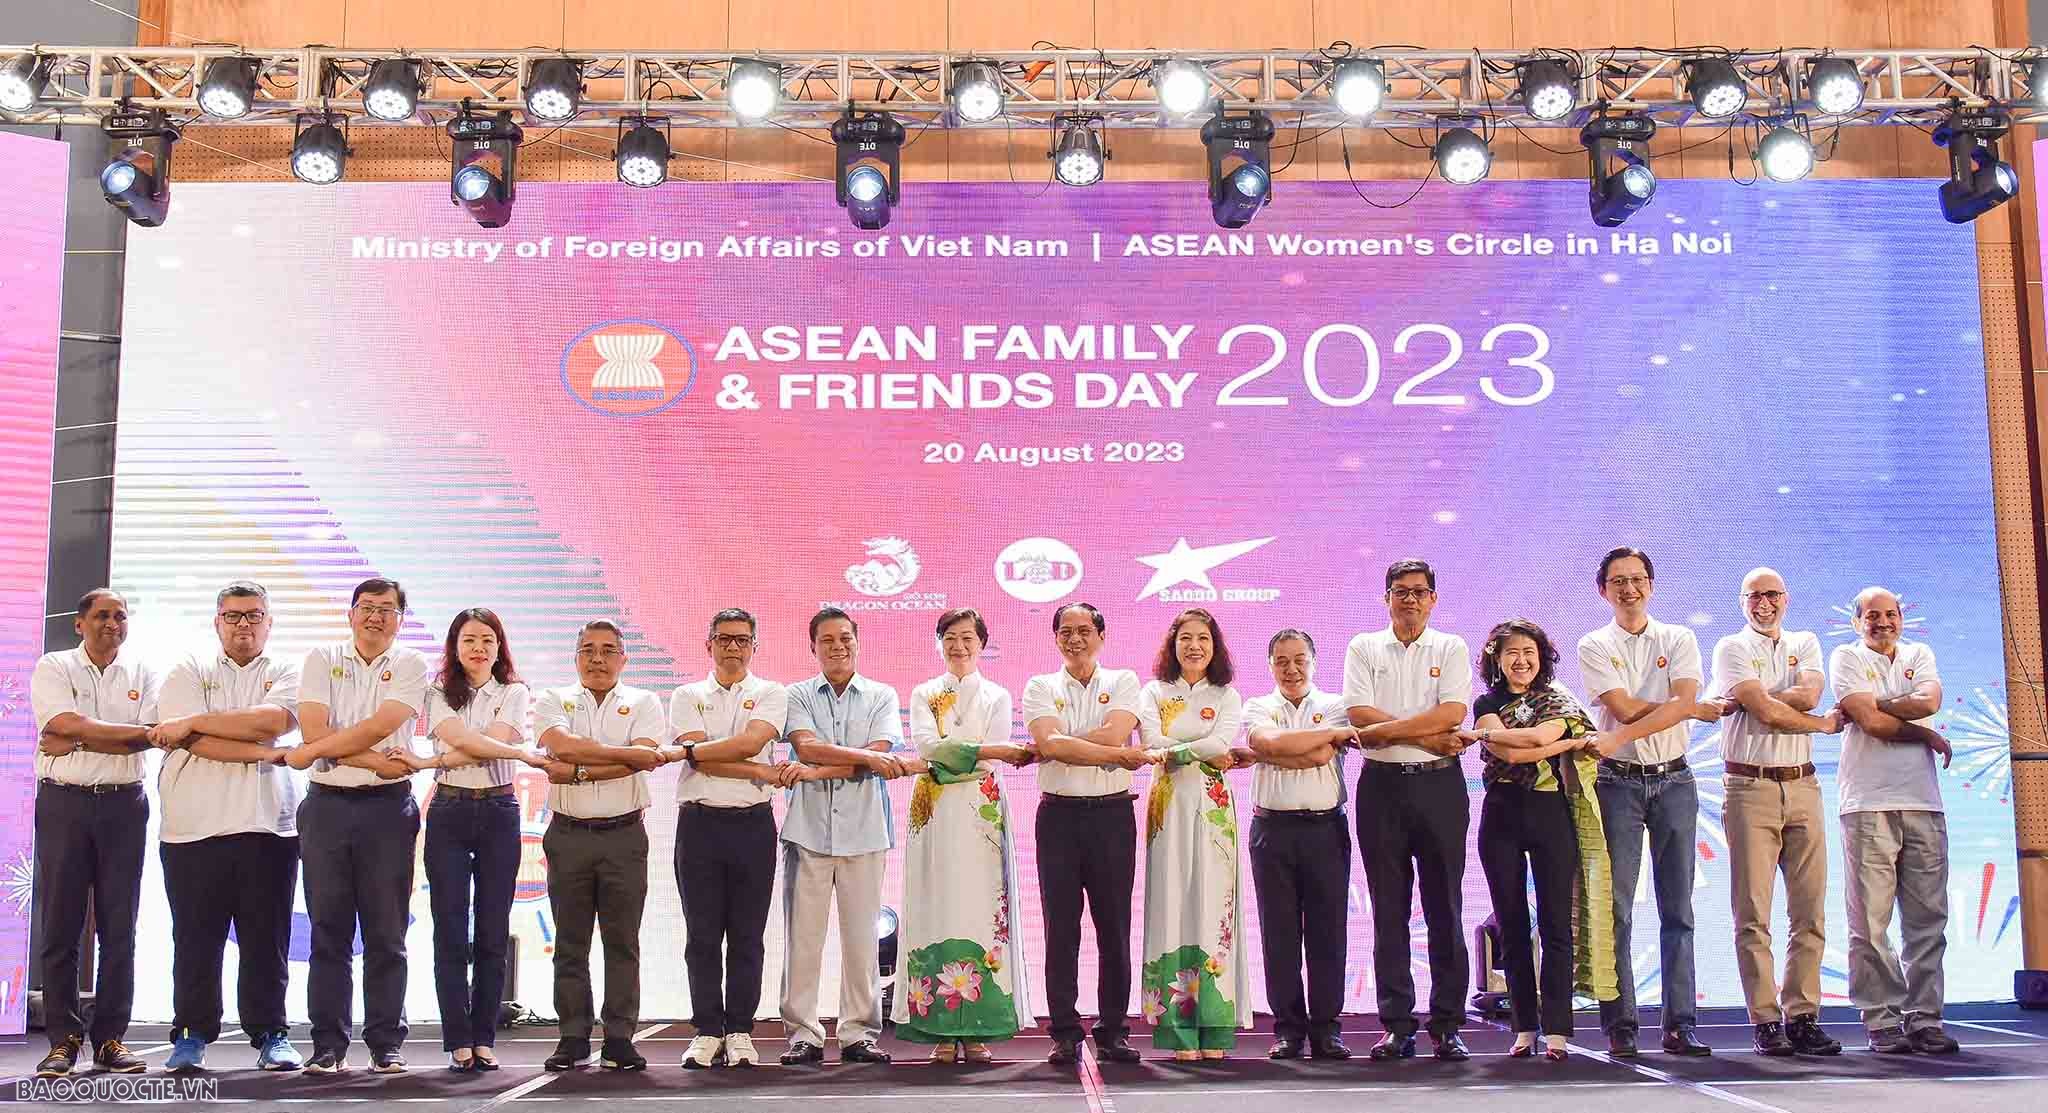 ASEAN Family and Friends Day to nurture friendship between ASEAN and partners